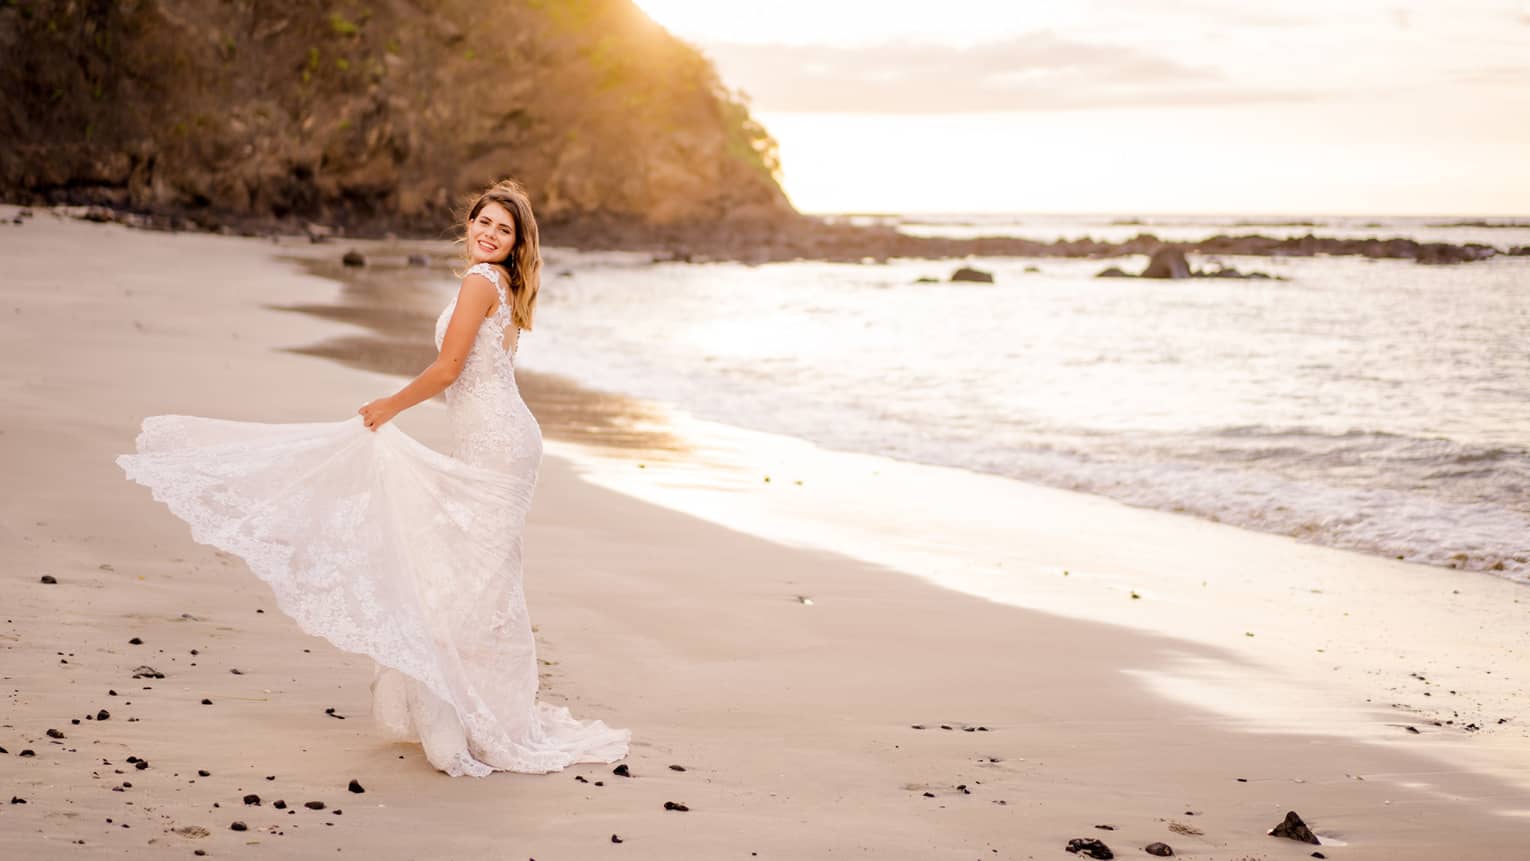 Bride in lace mermaid-style wedding gown holds up her train as she walks along the beach at sunset